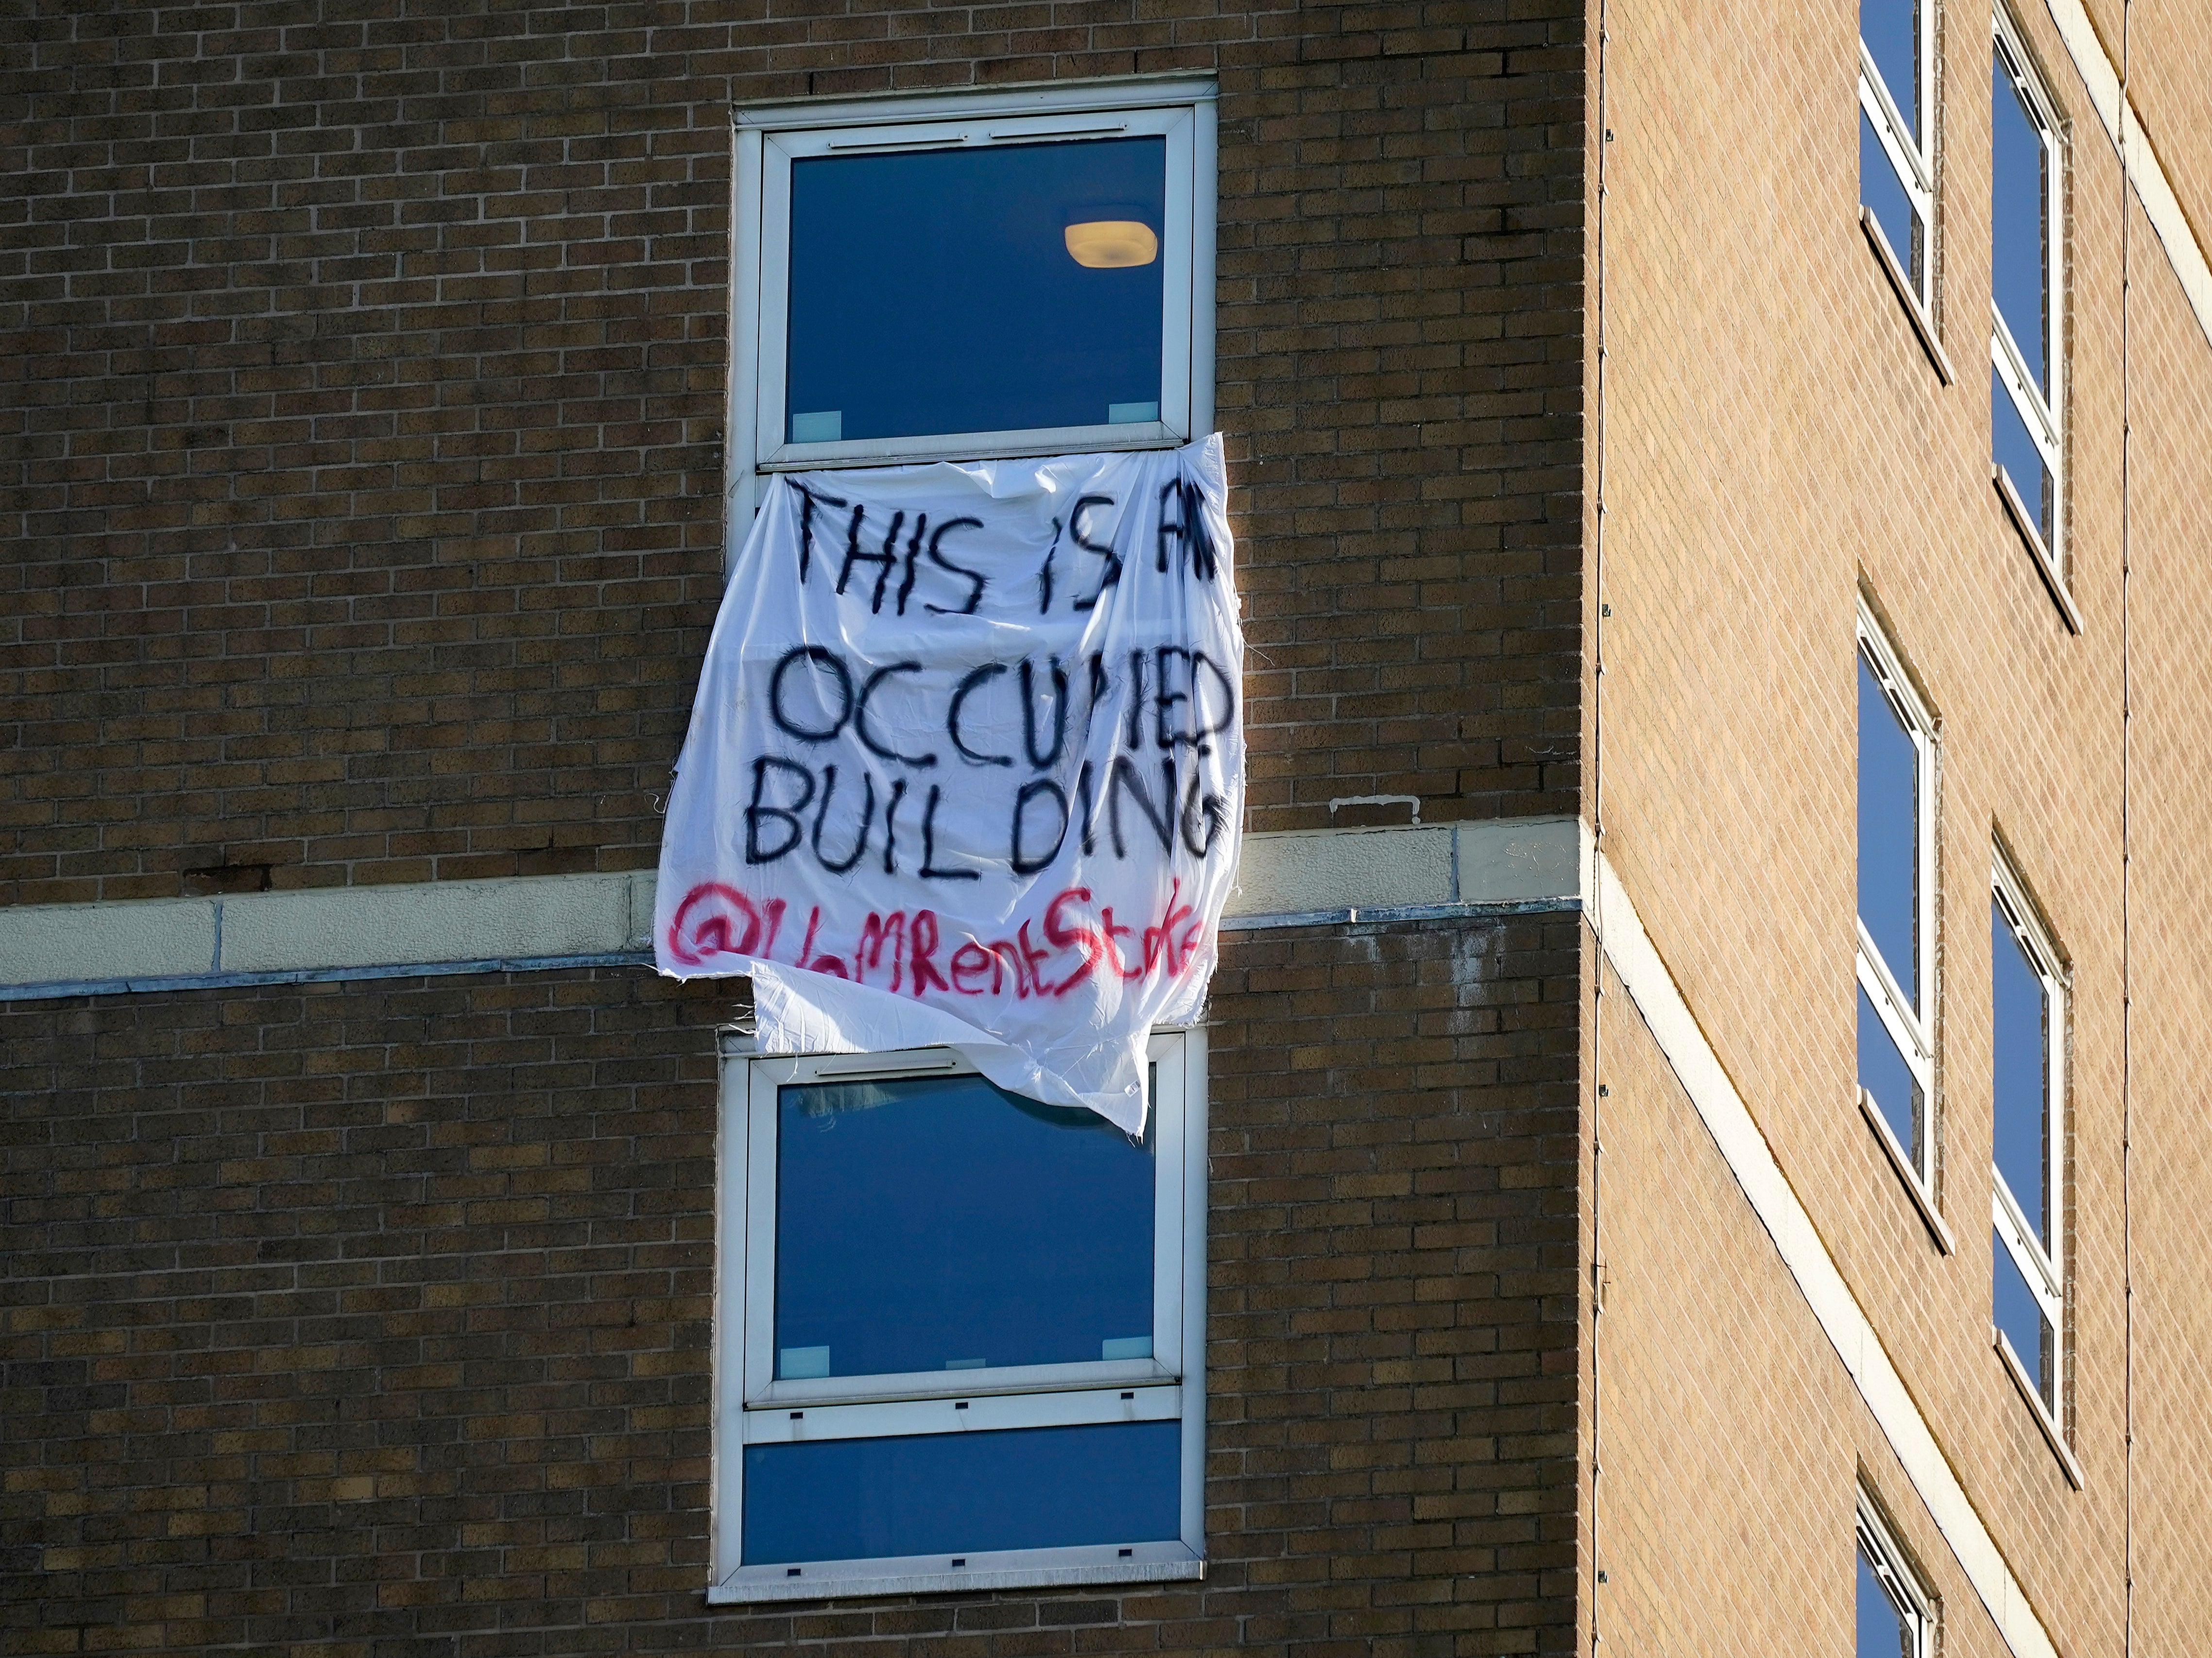 Students have occupied an accommodation tower block at the University of Manchester